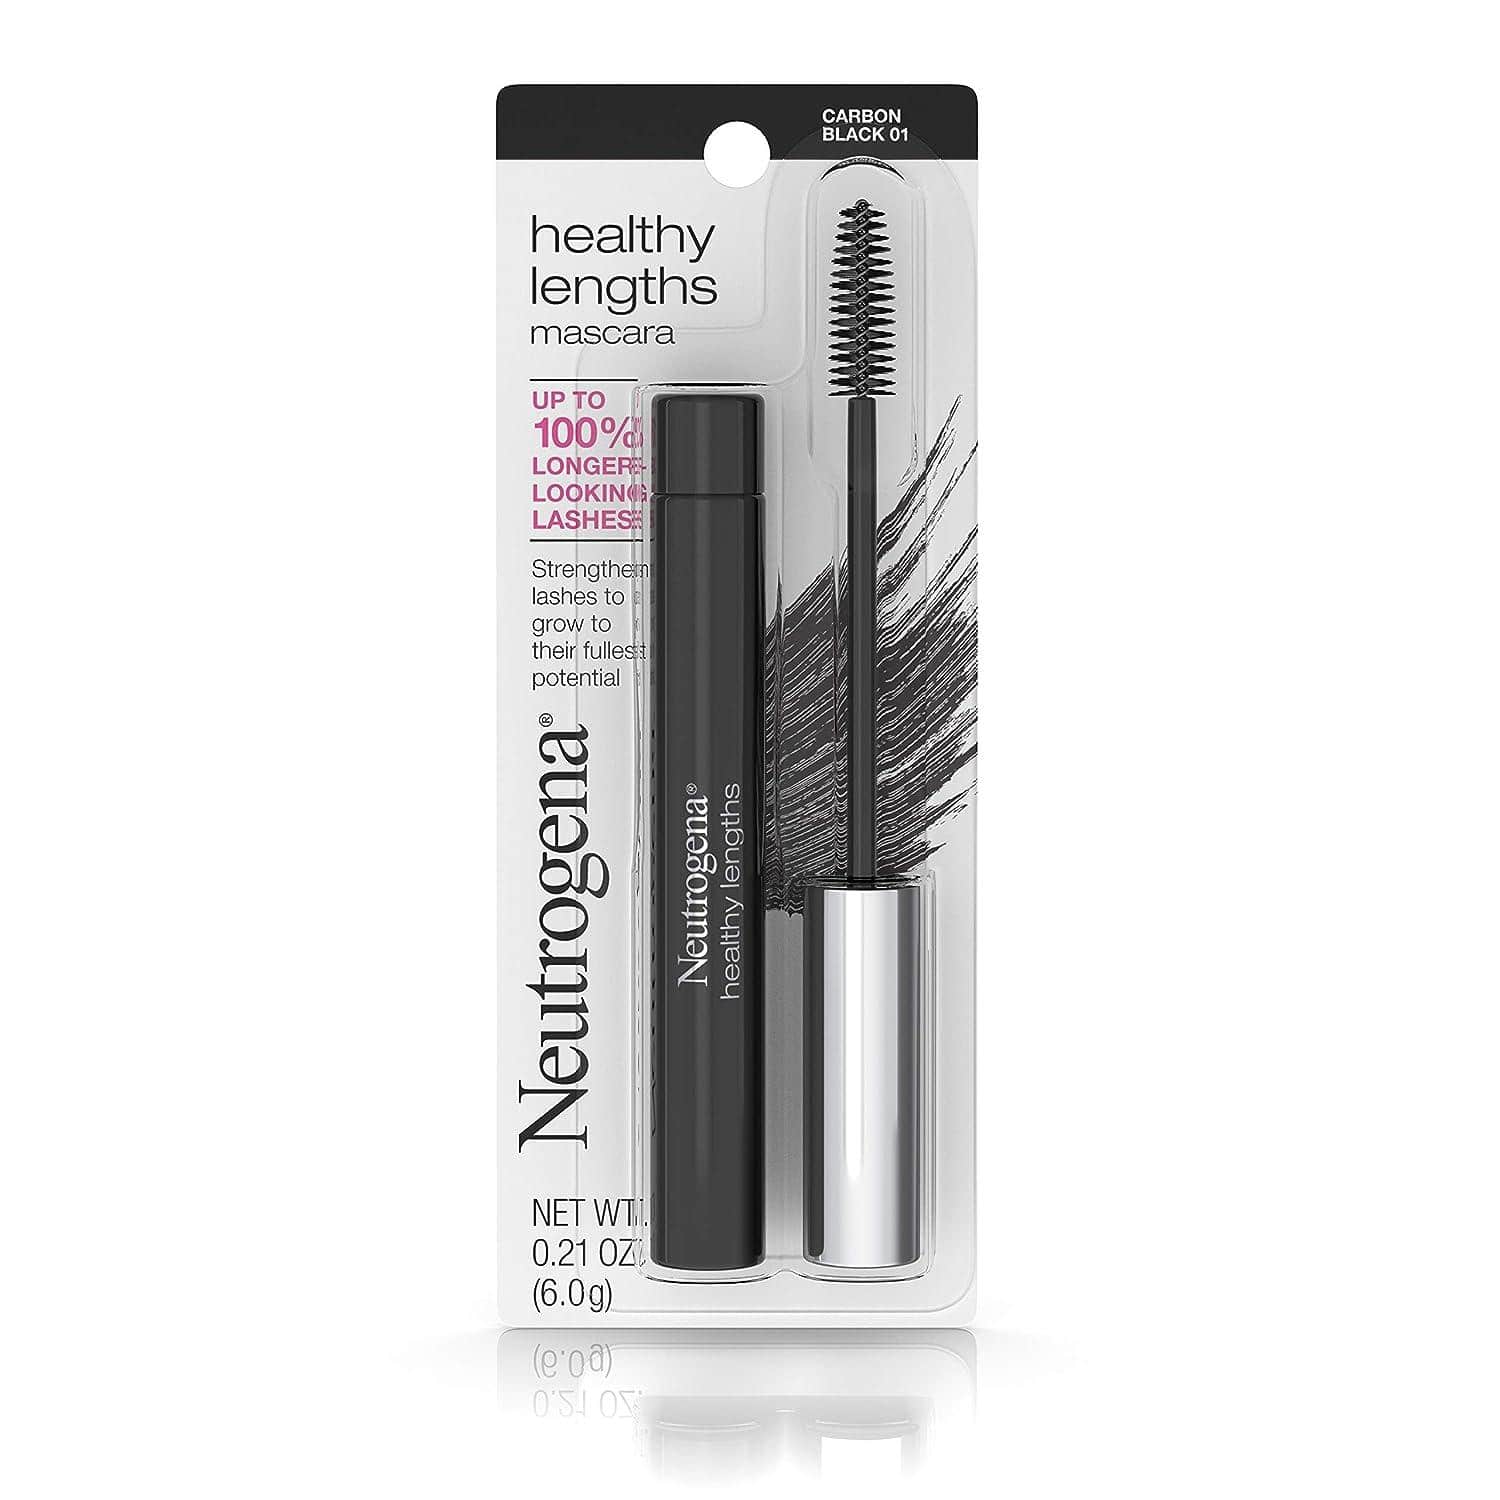 This lightweight mascara, enriched with hyaluronic acid, keratin, and vitamin E, offers an affordable daily volumizing effect, simultaneously strengthening and nourishing lashes. Ideal for those who prefer a glossier formula with moderate volume for effortless everyday wear.